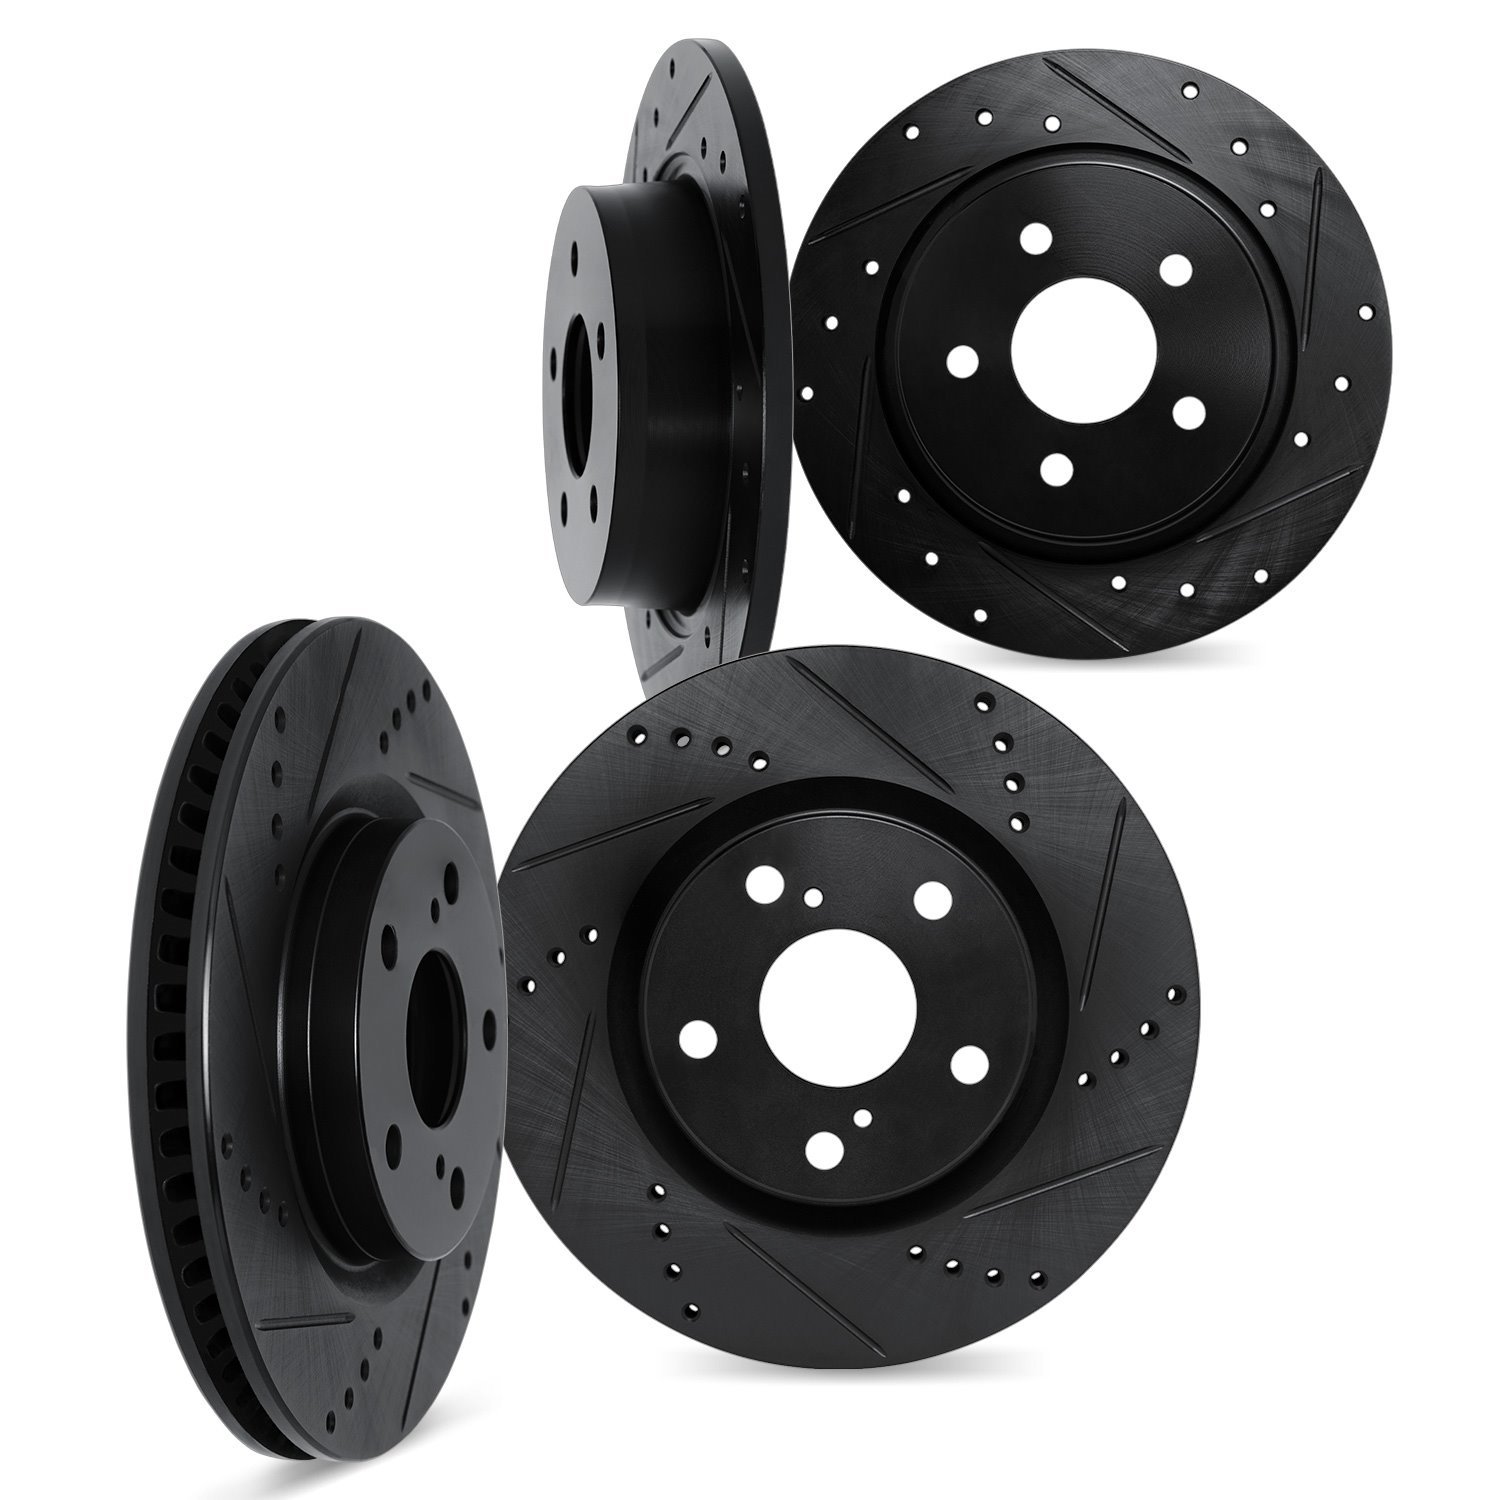 8004-73025 Drilled/Slotted Brake Rotors [Black], Fits Select Audi/Volkswagen, Position: Front and Rear